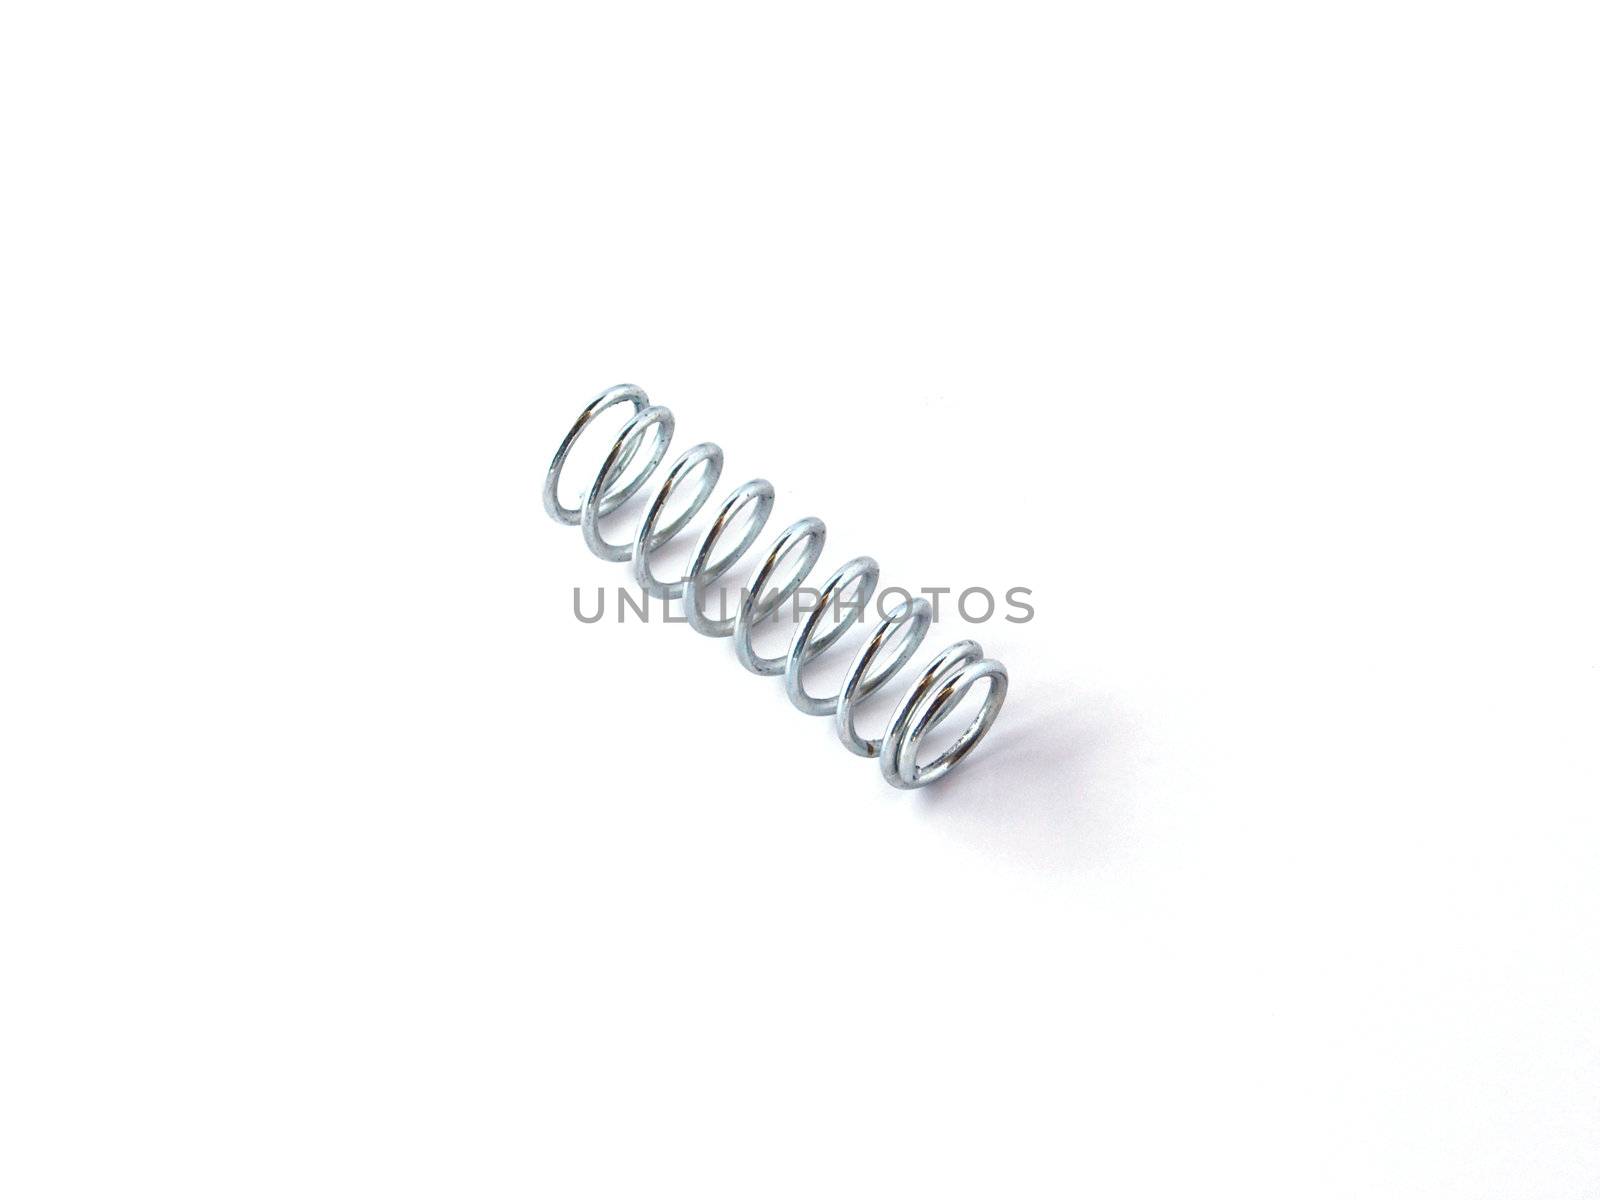 Steel spring on a white background.